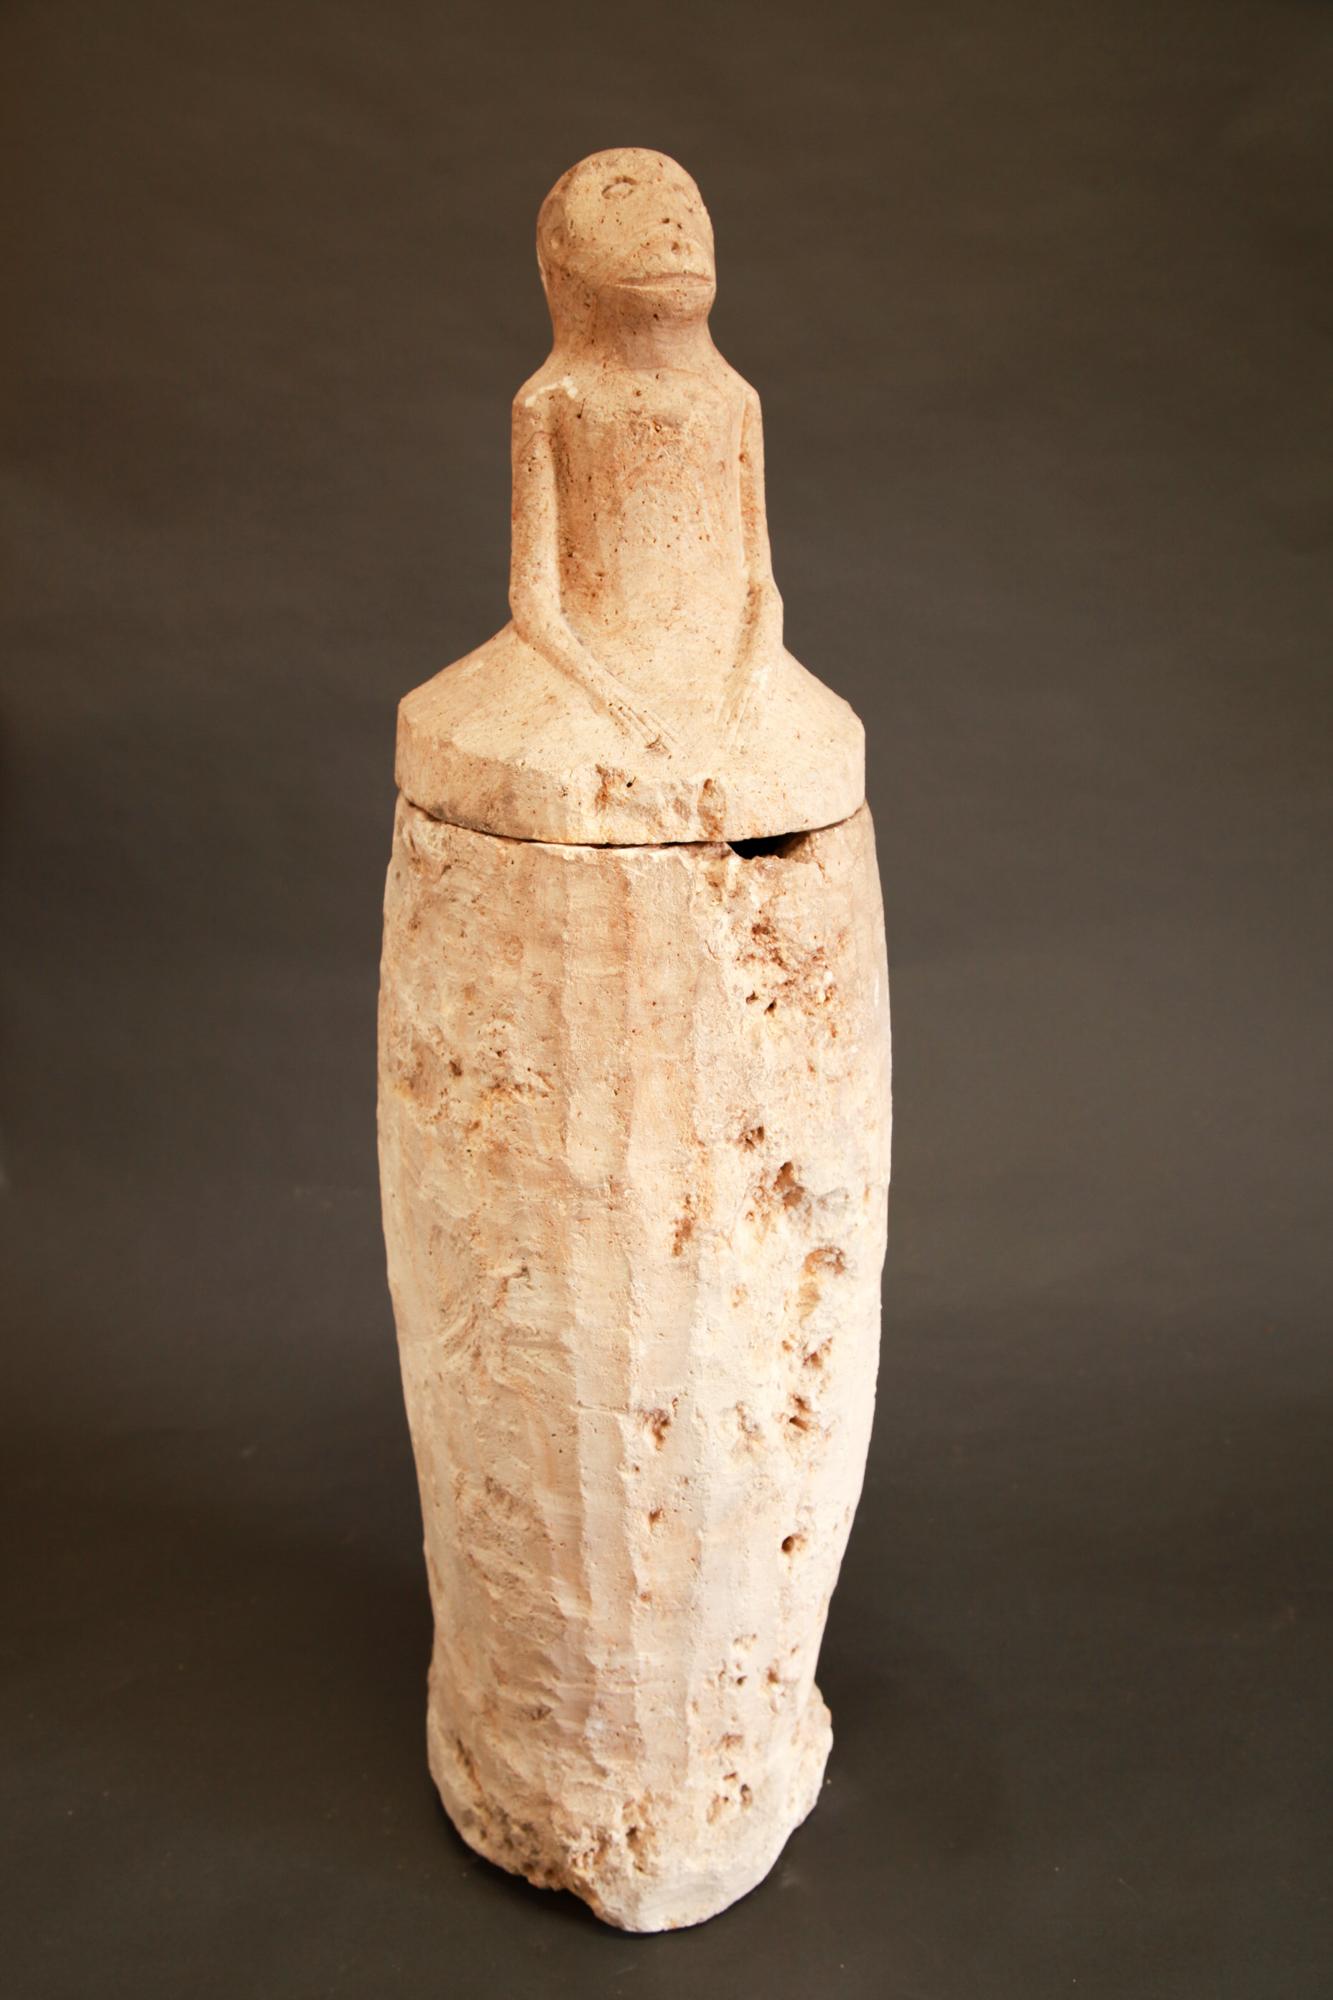 Tall Philippine lidded limestone secondary burial jar, 11th-15th century.

This tall limestone jar was used for secondary burial purposes by the Manobo people of Cotobato, Mindanao. The skull and selected long bones of the deceased were exhumed,